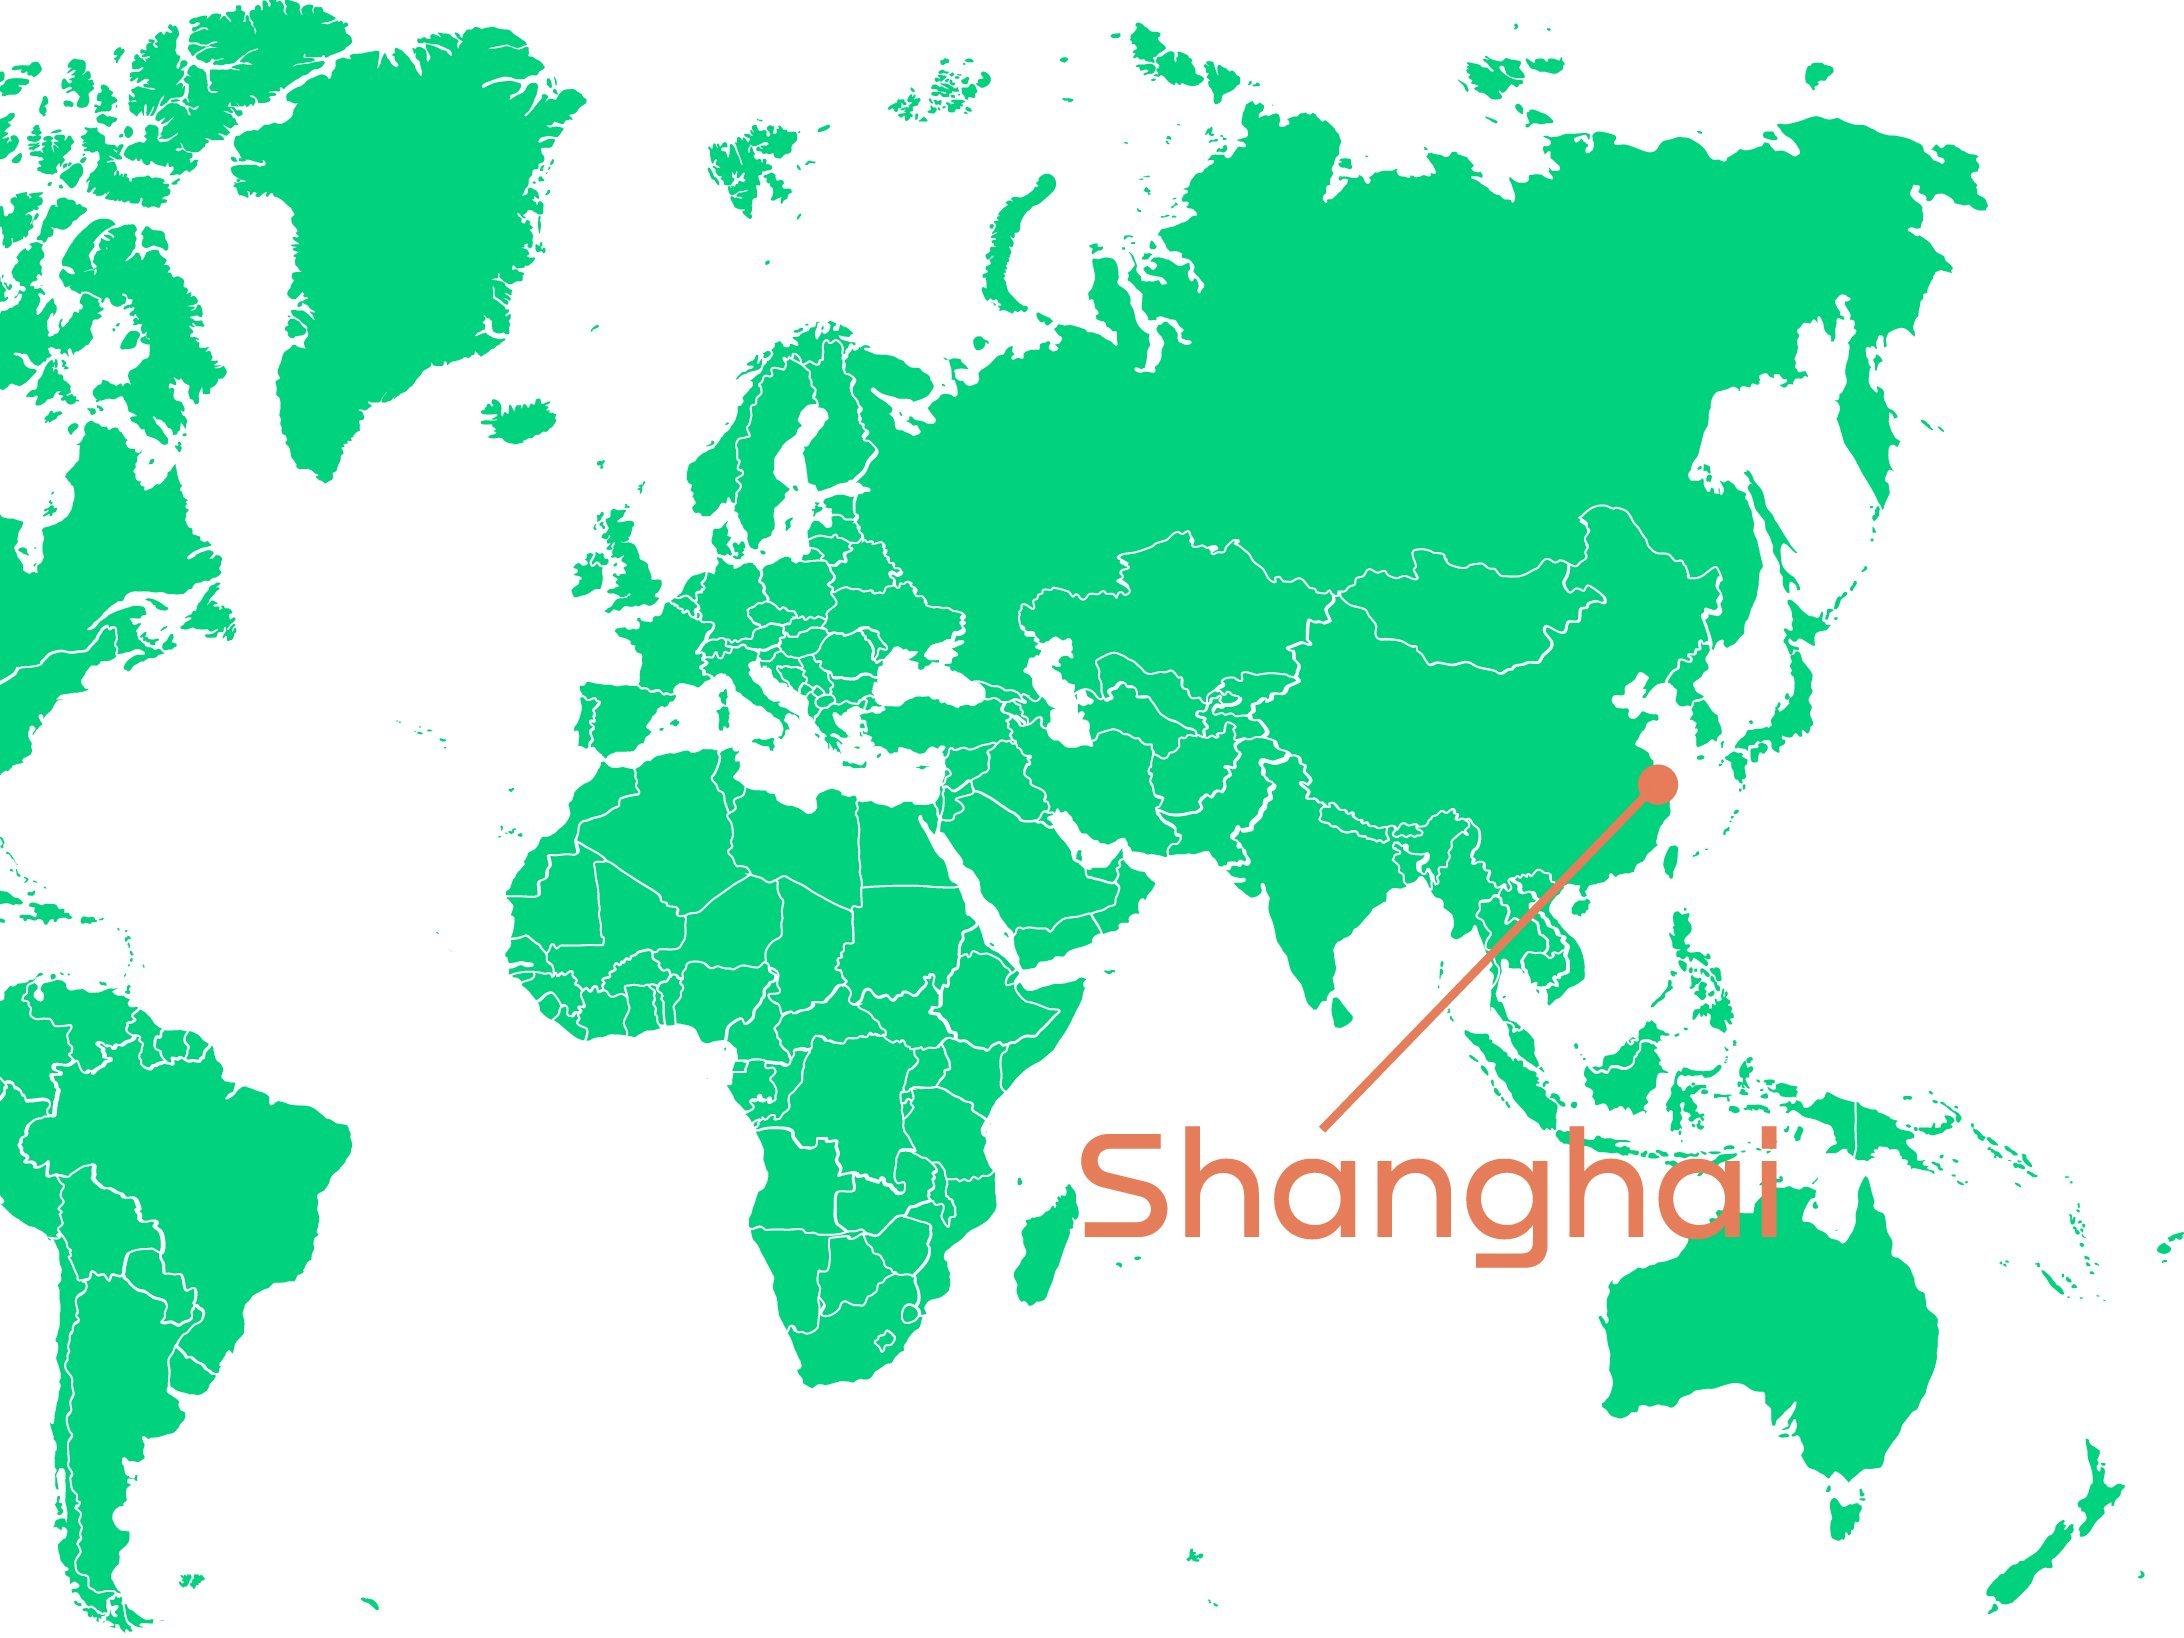 This image shows a green world map with marker on Shanghai